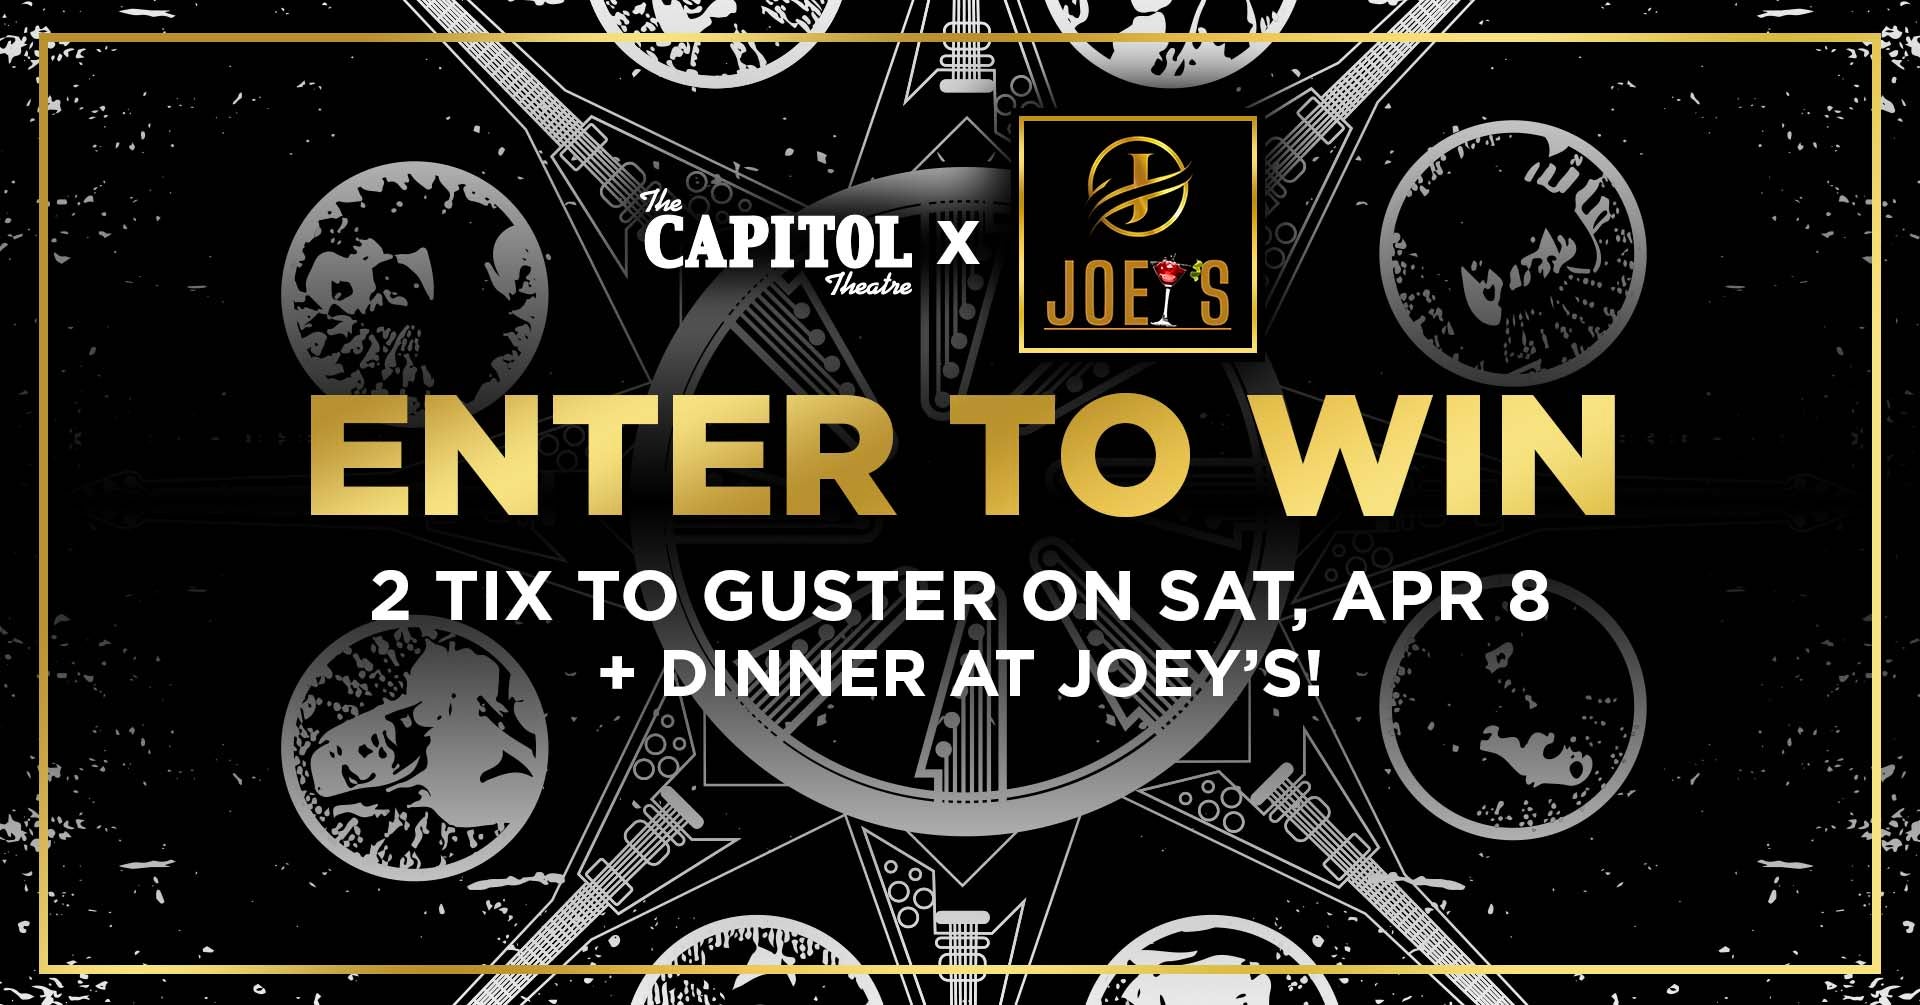 More Info for Win Two Tickets to Guster On SAT, APR 8 + Dinner at Joey's